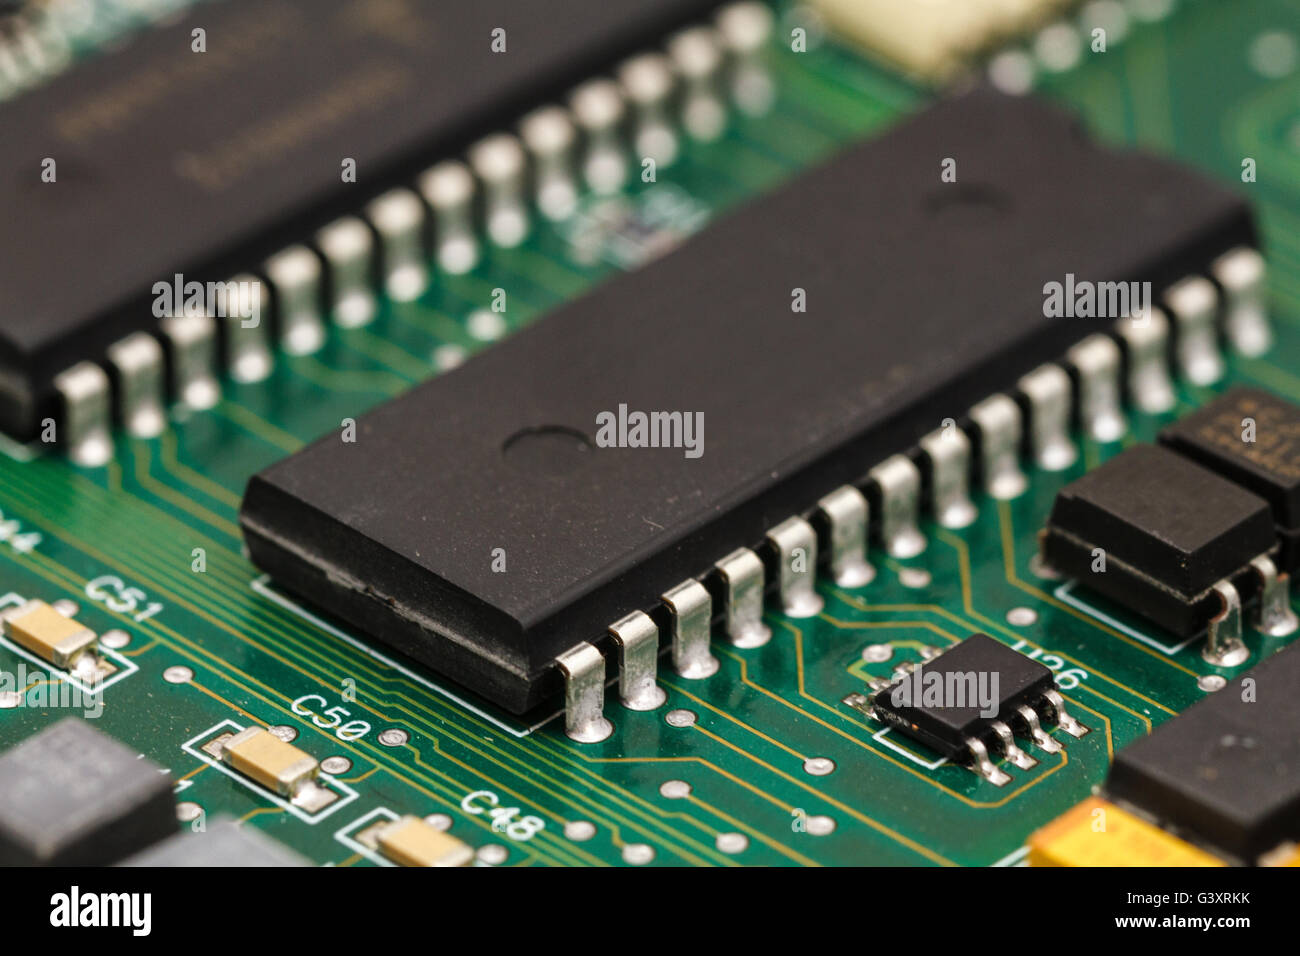 Printed circuit board with ICs, chip capacitors, and chip resistors. Stock Photo